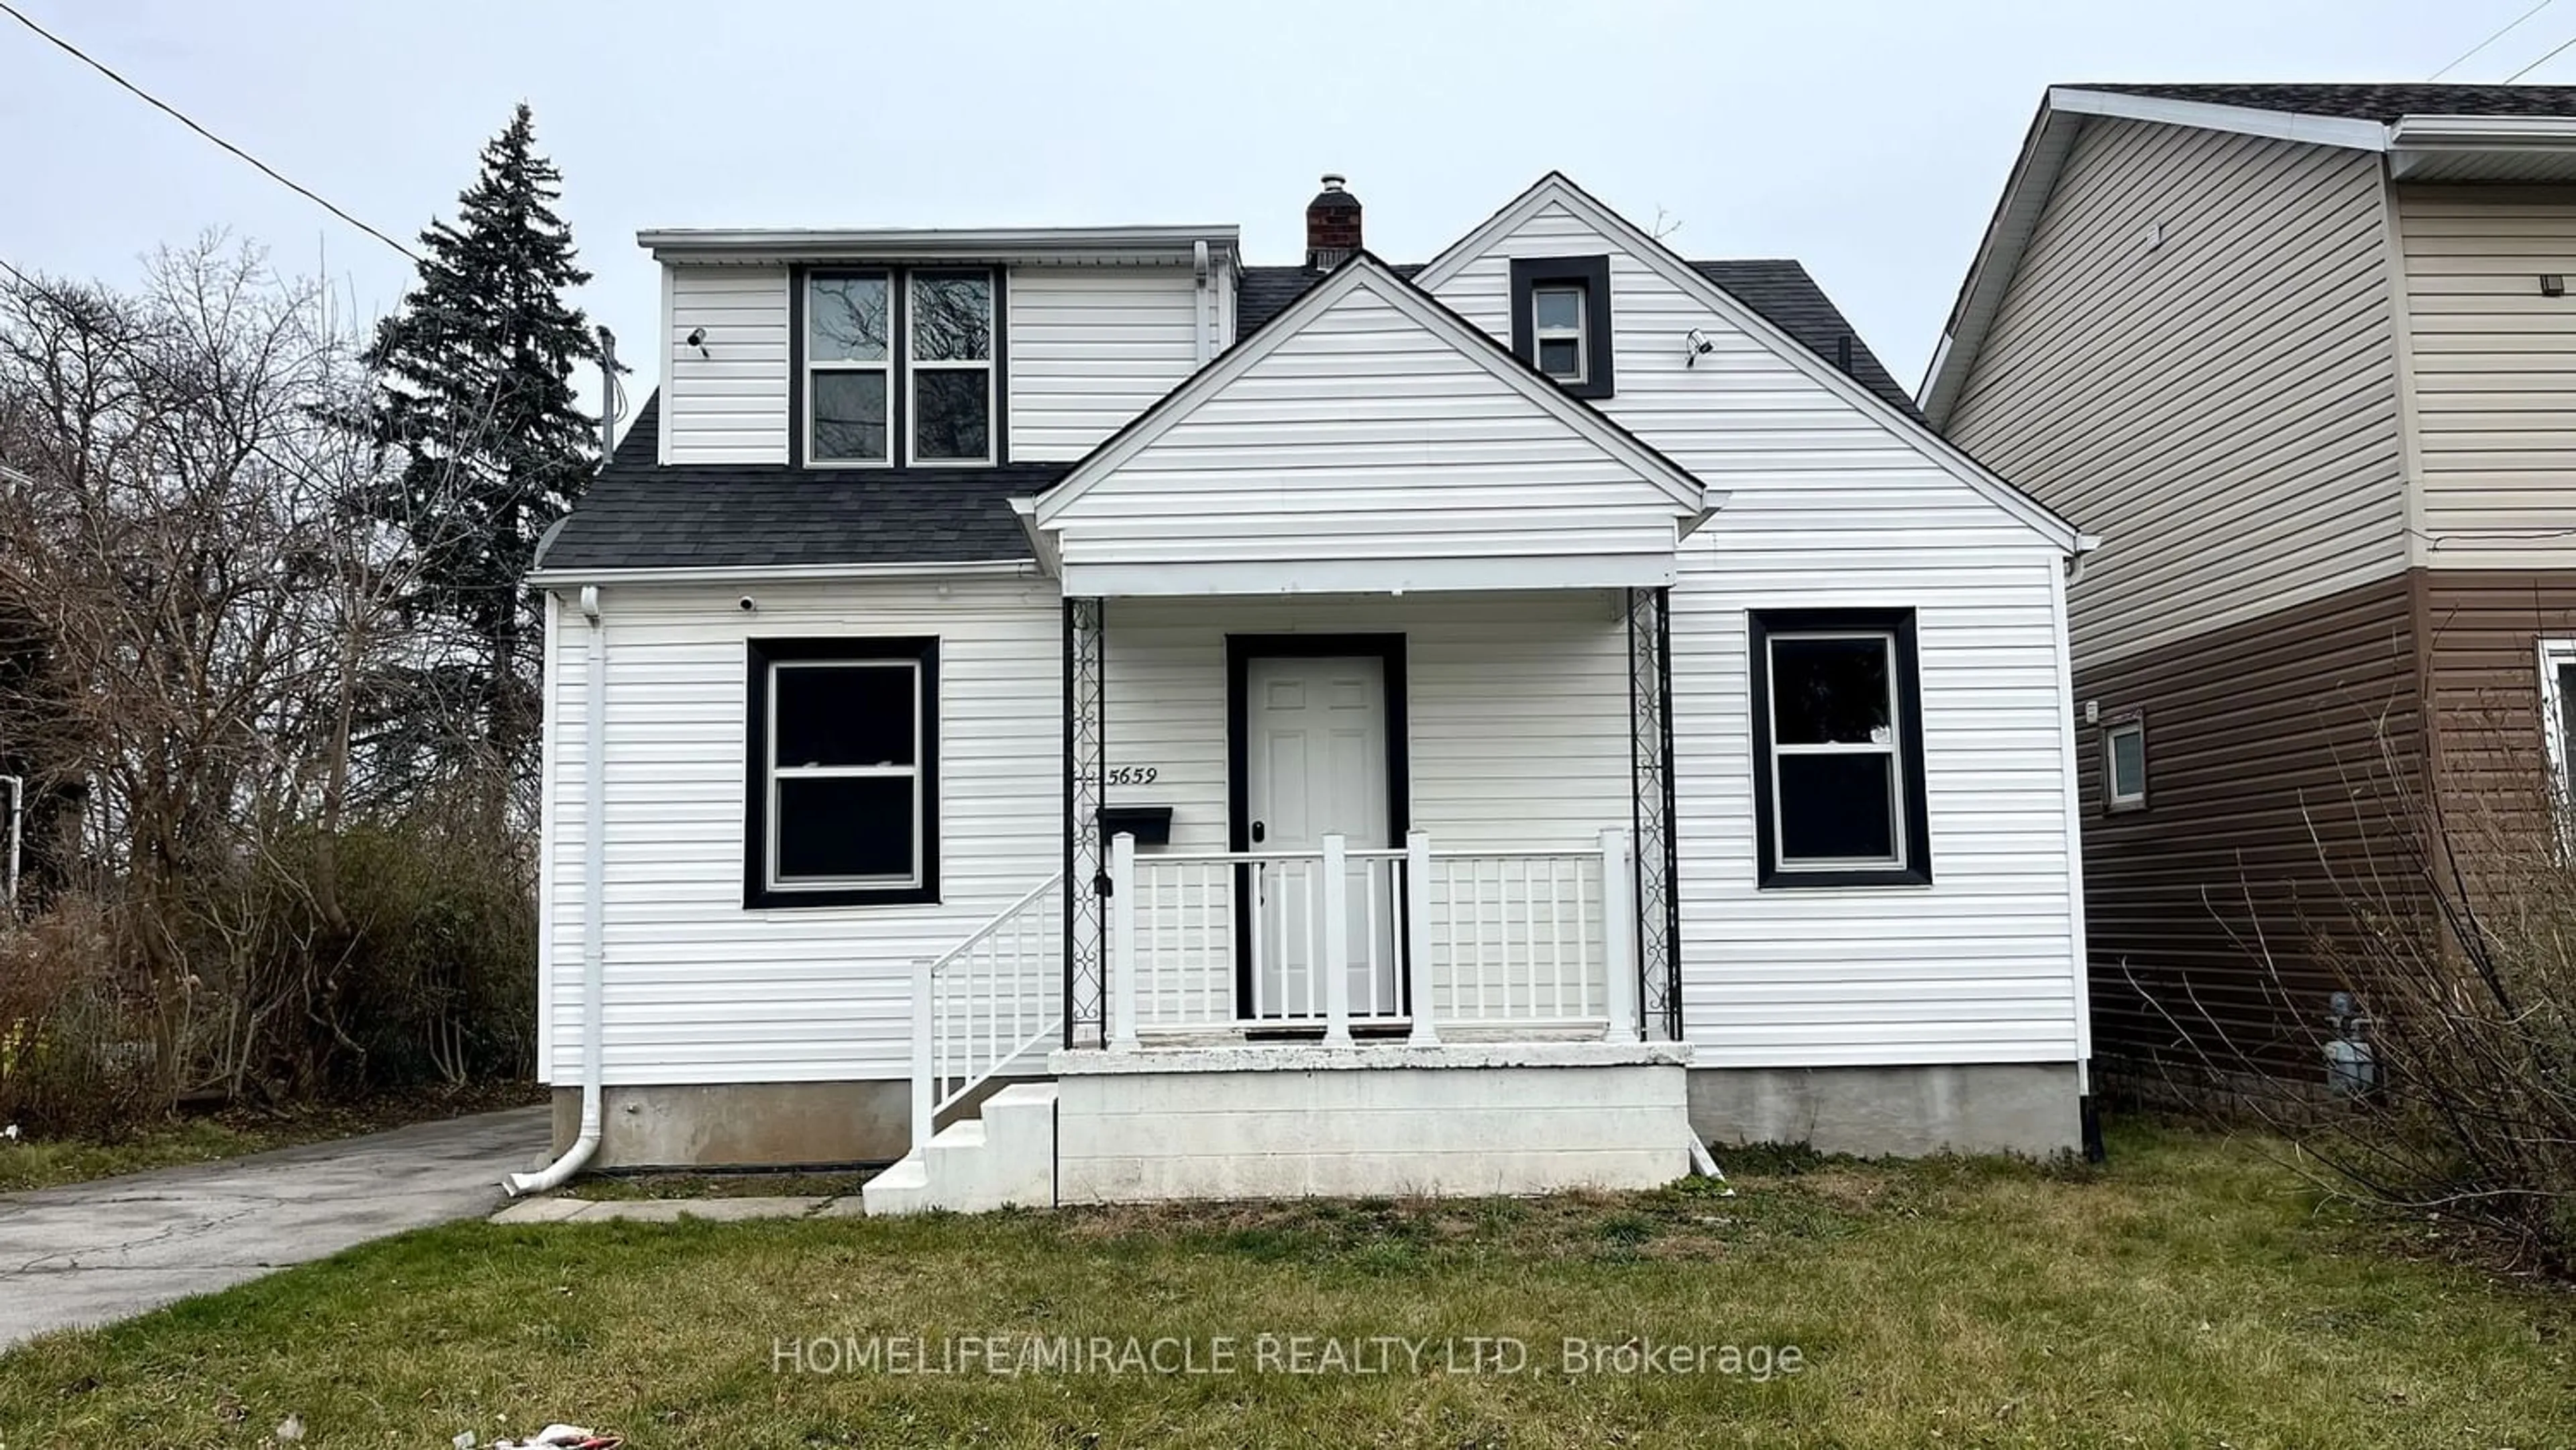 Frontside or backside of a home for 5659 Robinson St, Niagara Falls Ontario L2G 2B1